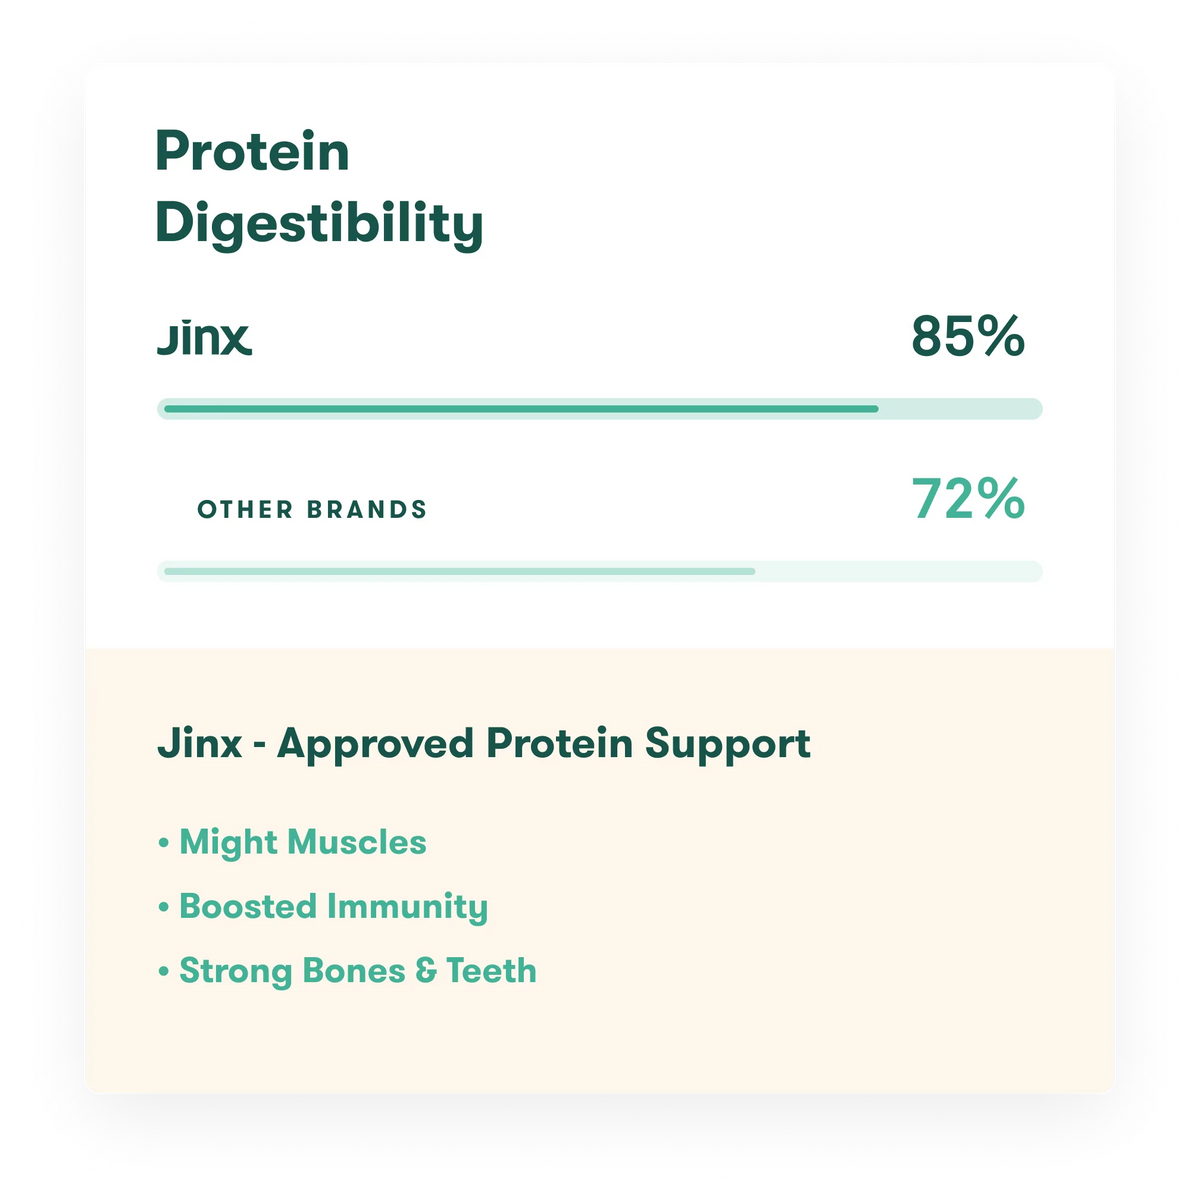 Protein digestibility graph with Jinx at 85% and other brands at 72% 